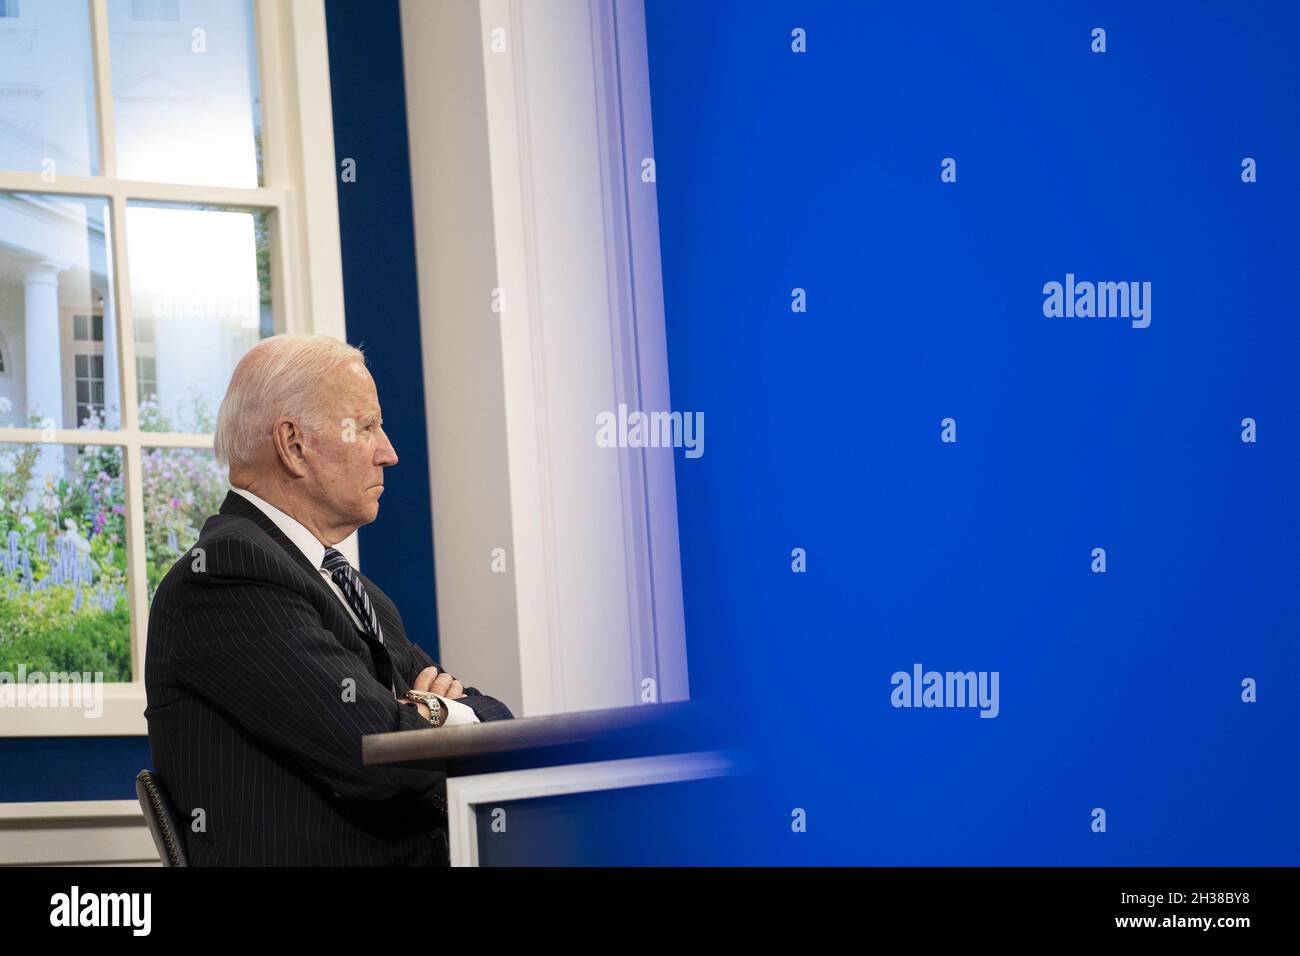 Washington, United States. 26th Oct, 2021. U.S. President Joe Biden listens during a virtual U.S.-Association of Southeast Asian Nations Summit in the South Court Auditorium of the Eisenhower Executive Office Building near the White House in Washington, DC Tuesday, October 26, 2021. Photo by Sarah Silbiger/UPI Credit: UPI/Alamy Live News Stock Photo